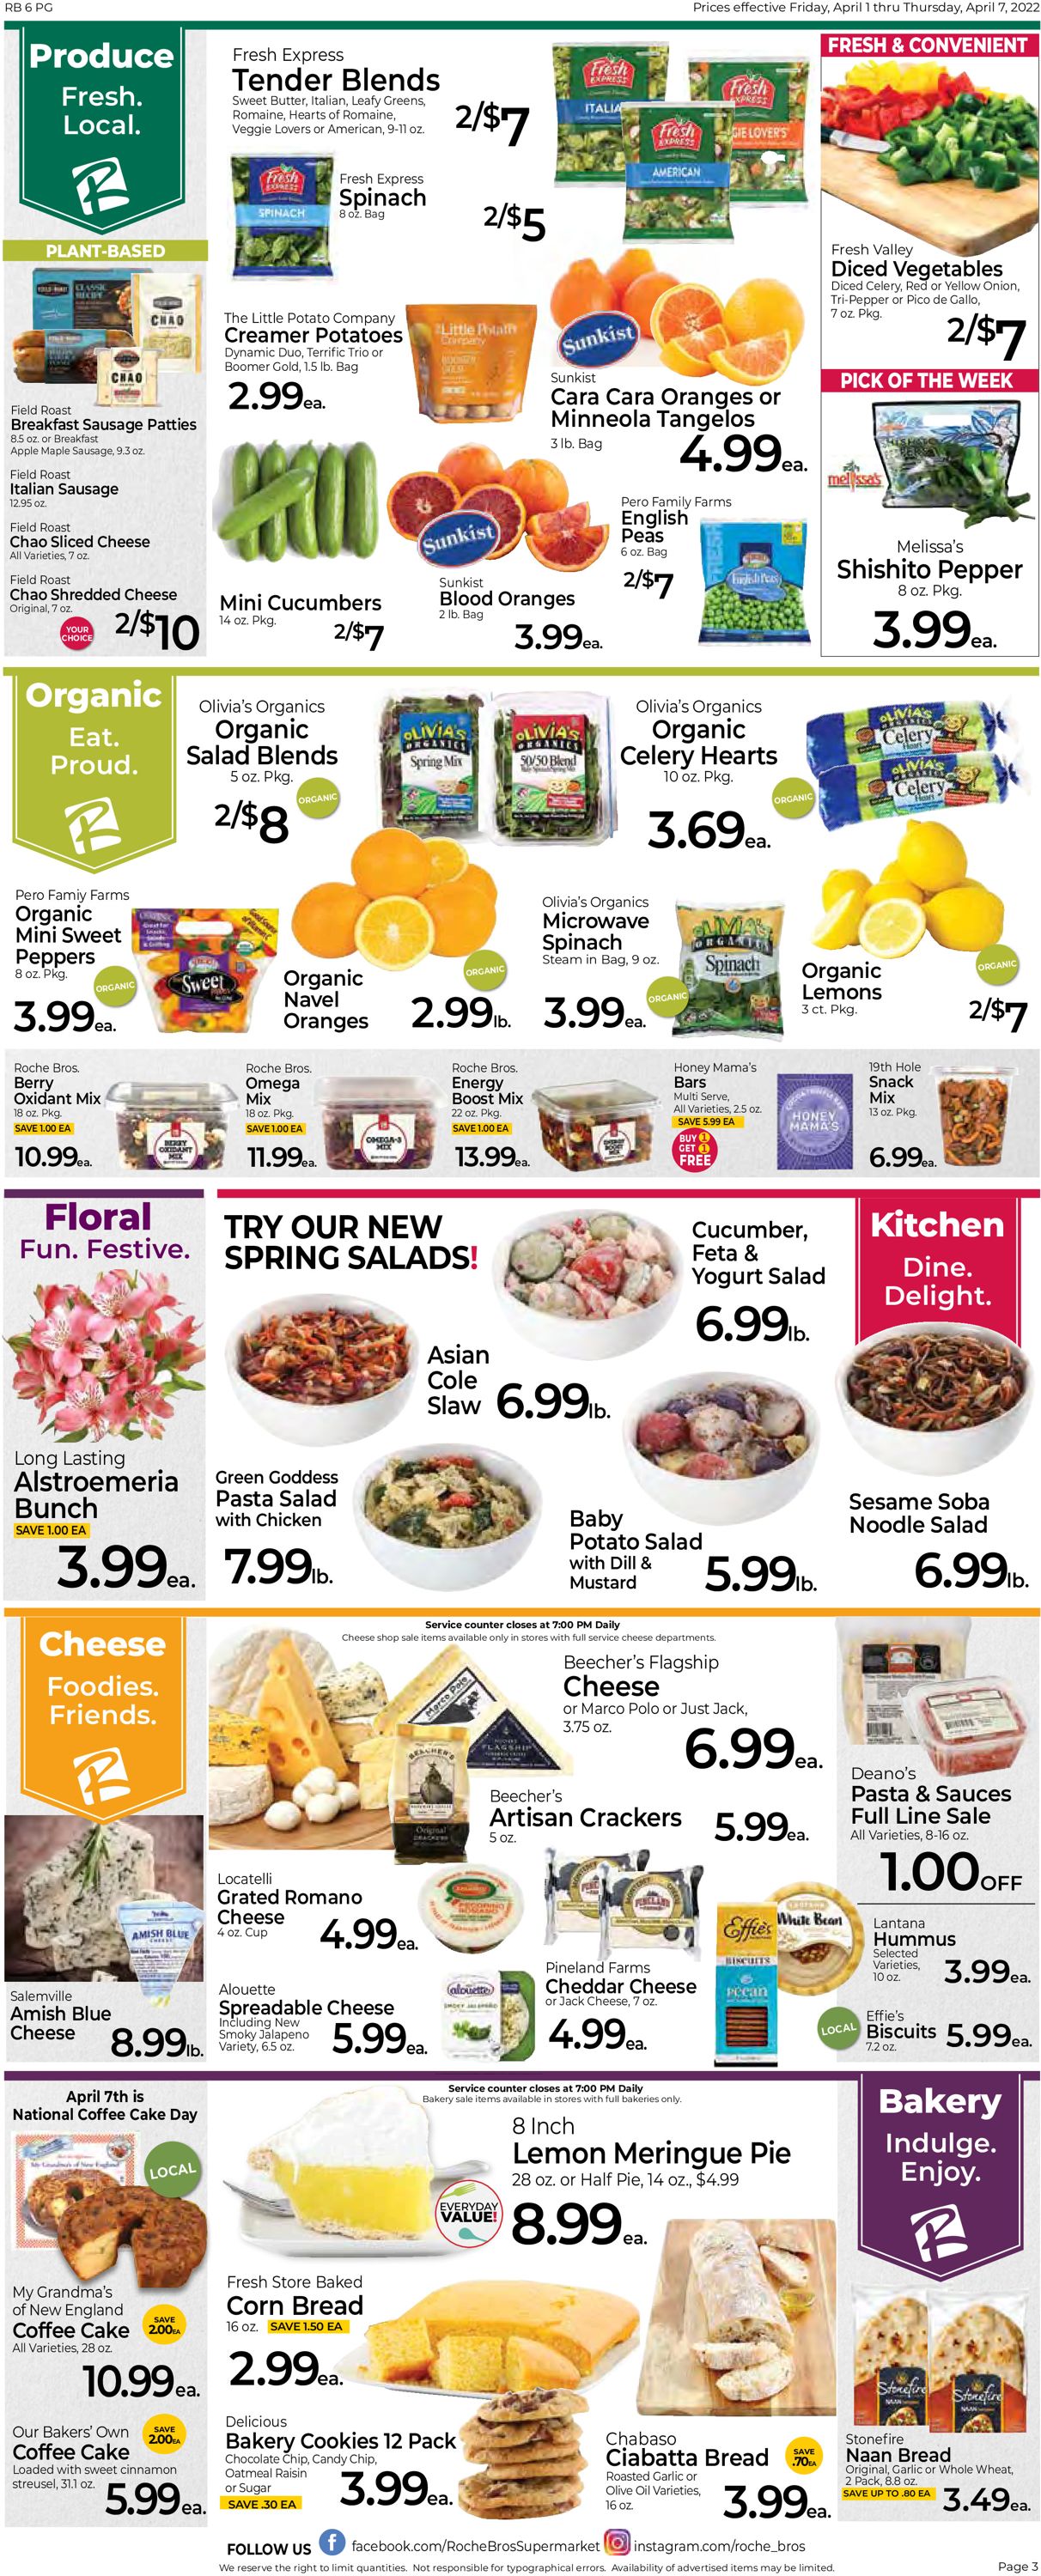 Catalogue Roche Bros. Supermarkets from 04/01/2022